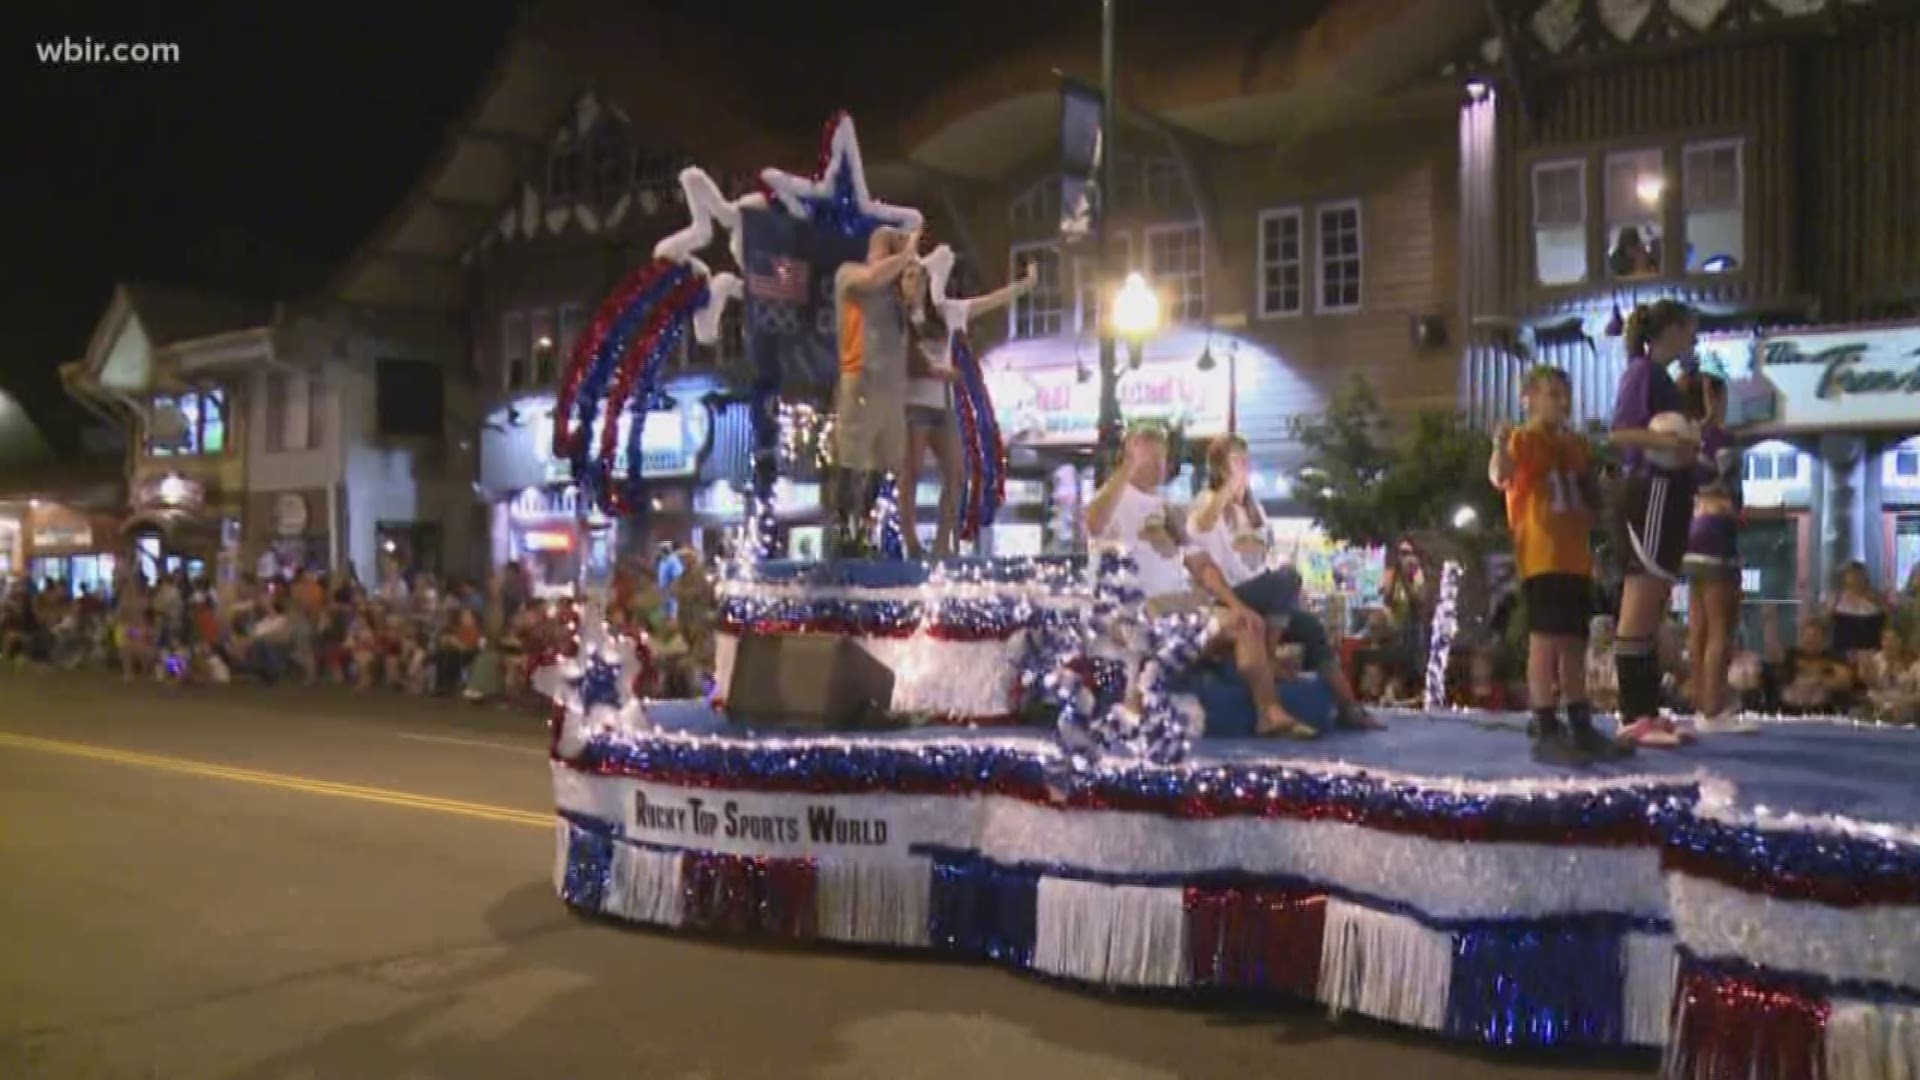 The annual midnight parade draws thousands to Gatlinburg, and people are already scoping out the best seats for the nation's first 4th of July parade. July 3, 2018.